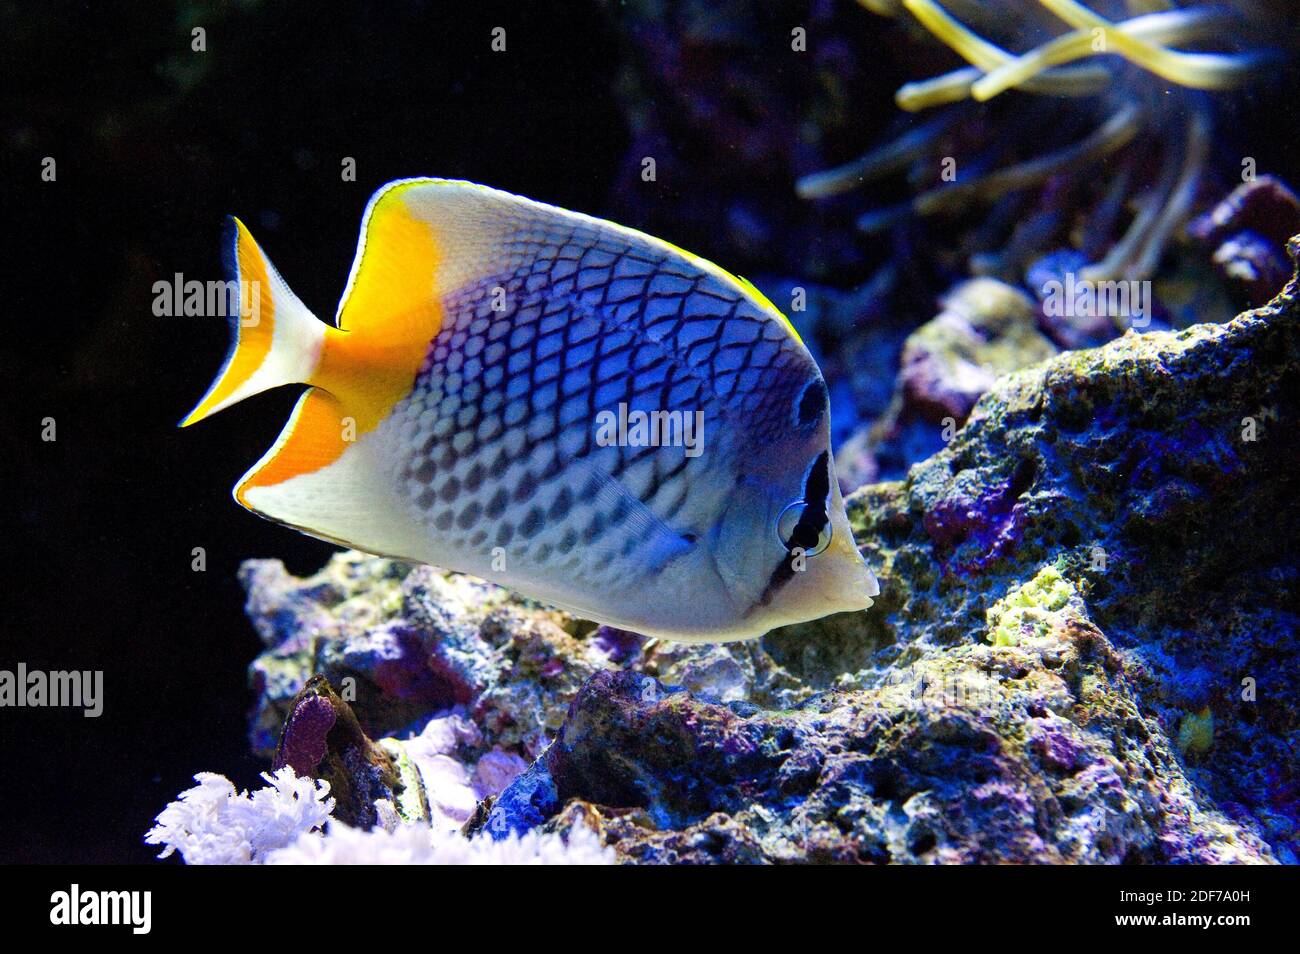 Pearlscale butterflyfish (Chaetodon xanthurus) is a marine fish native to tropical Indo-Pacific Ocean. Stock Photo